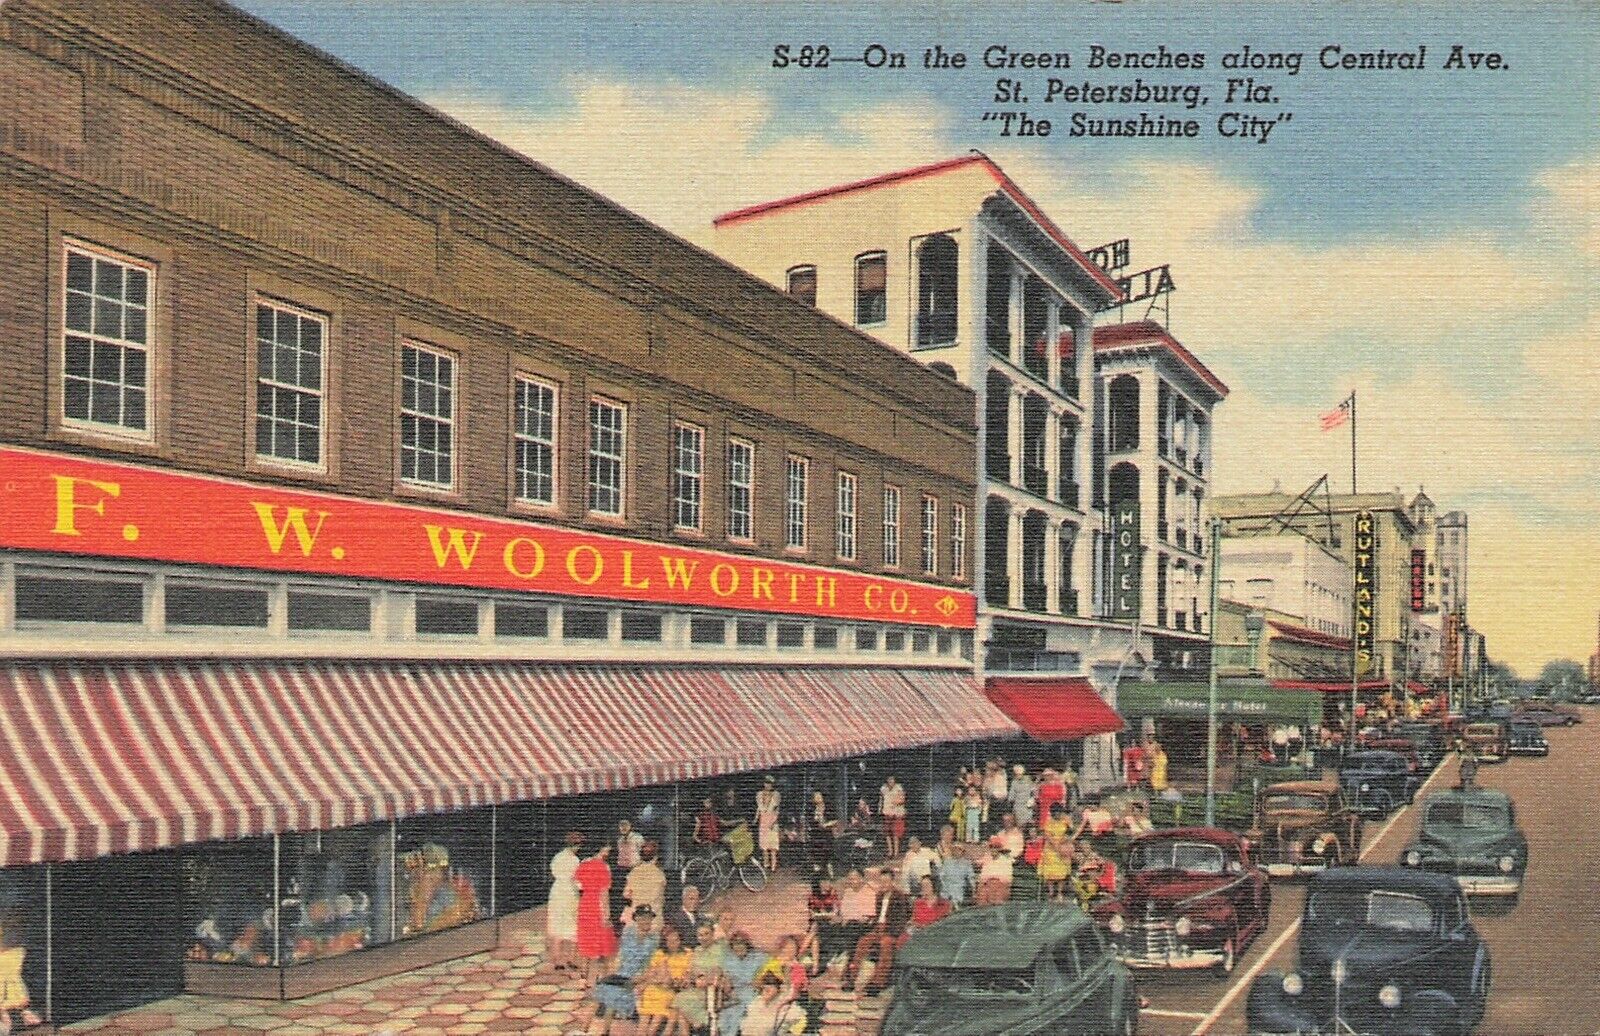 Woolworth Green Benches St. Petersburg Florida 1940s Curt Teich Linen Postcard